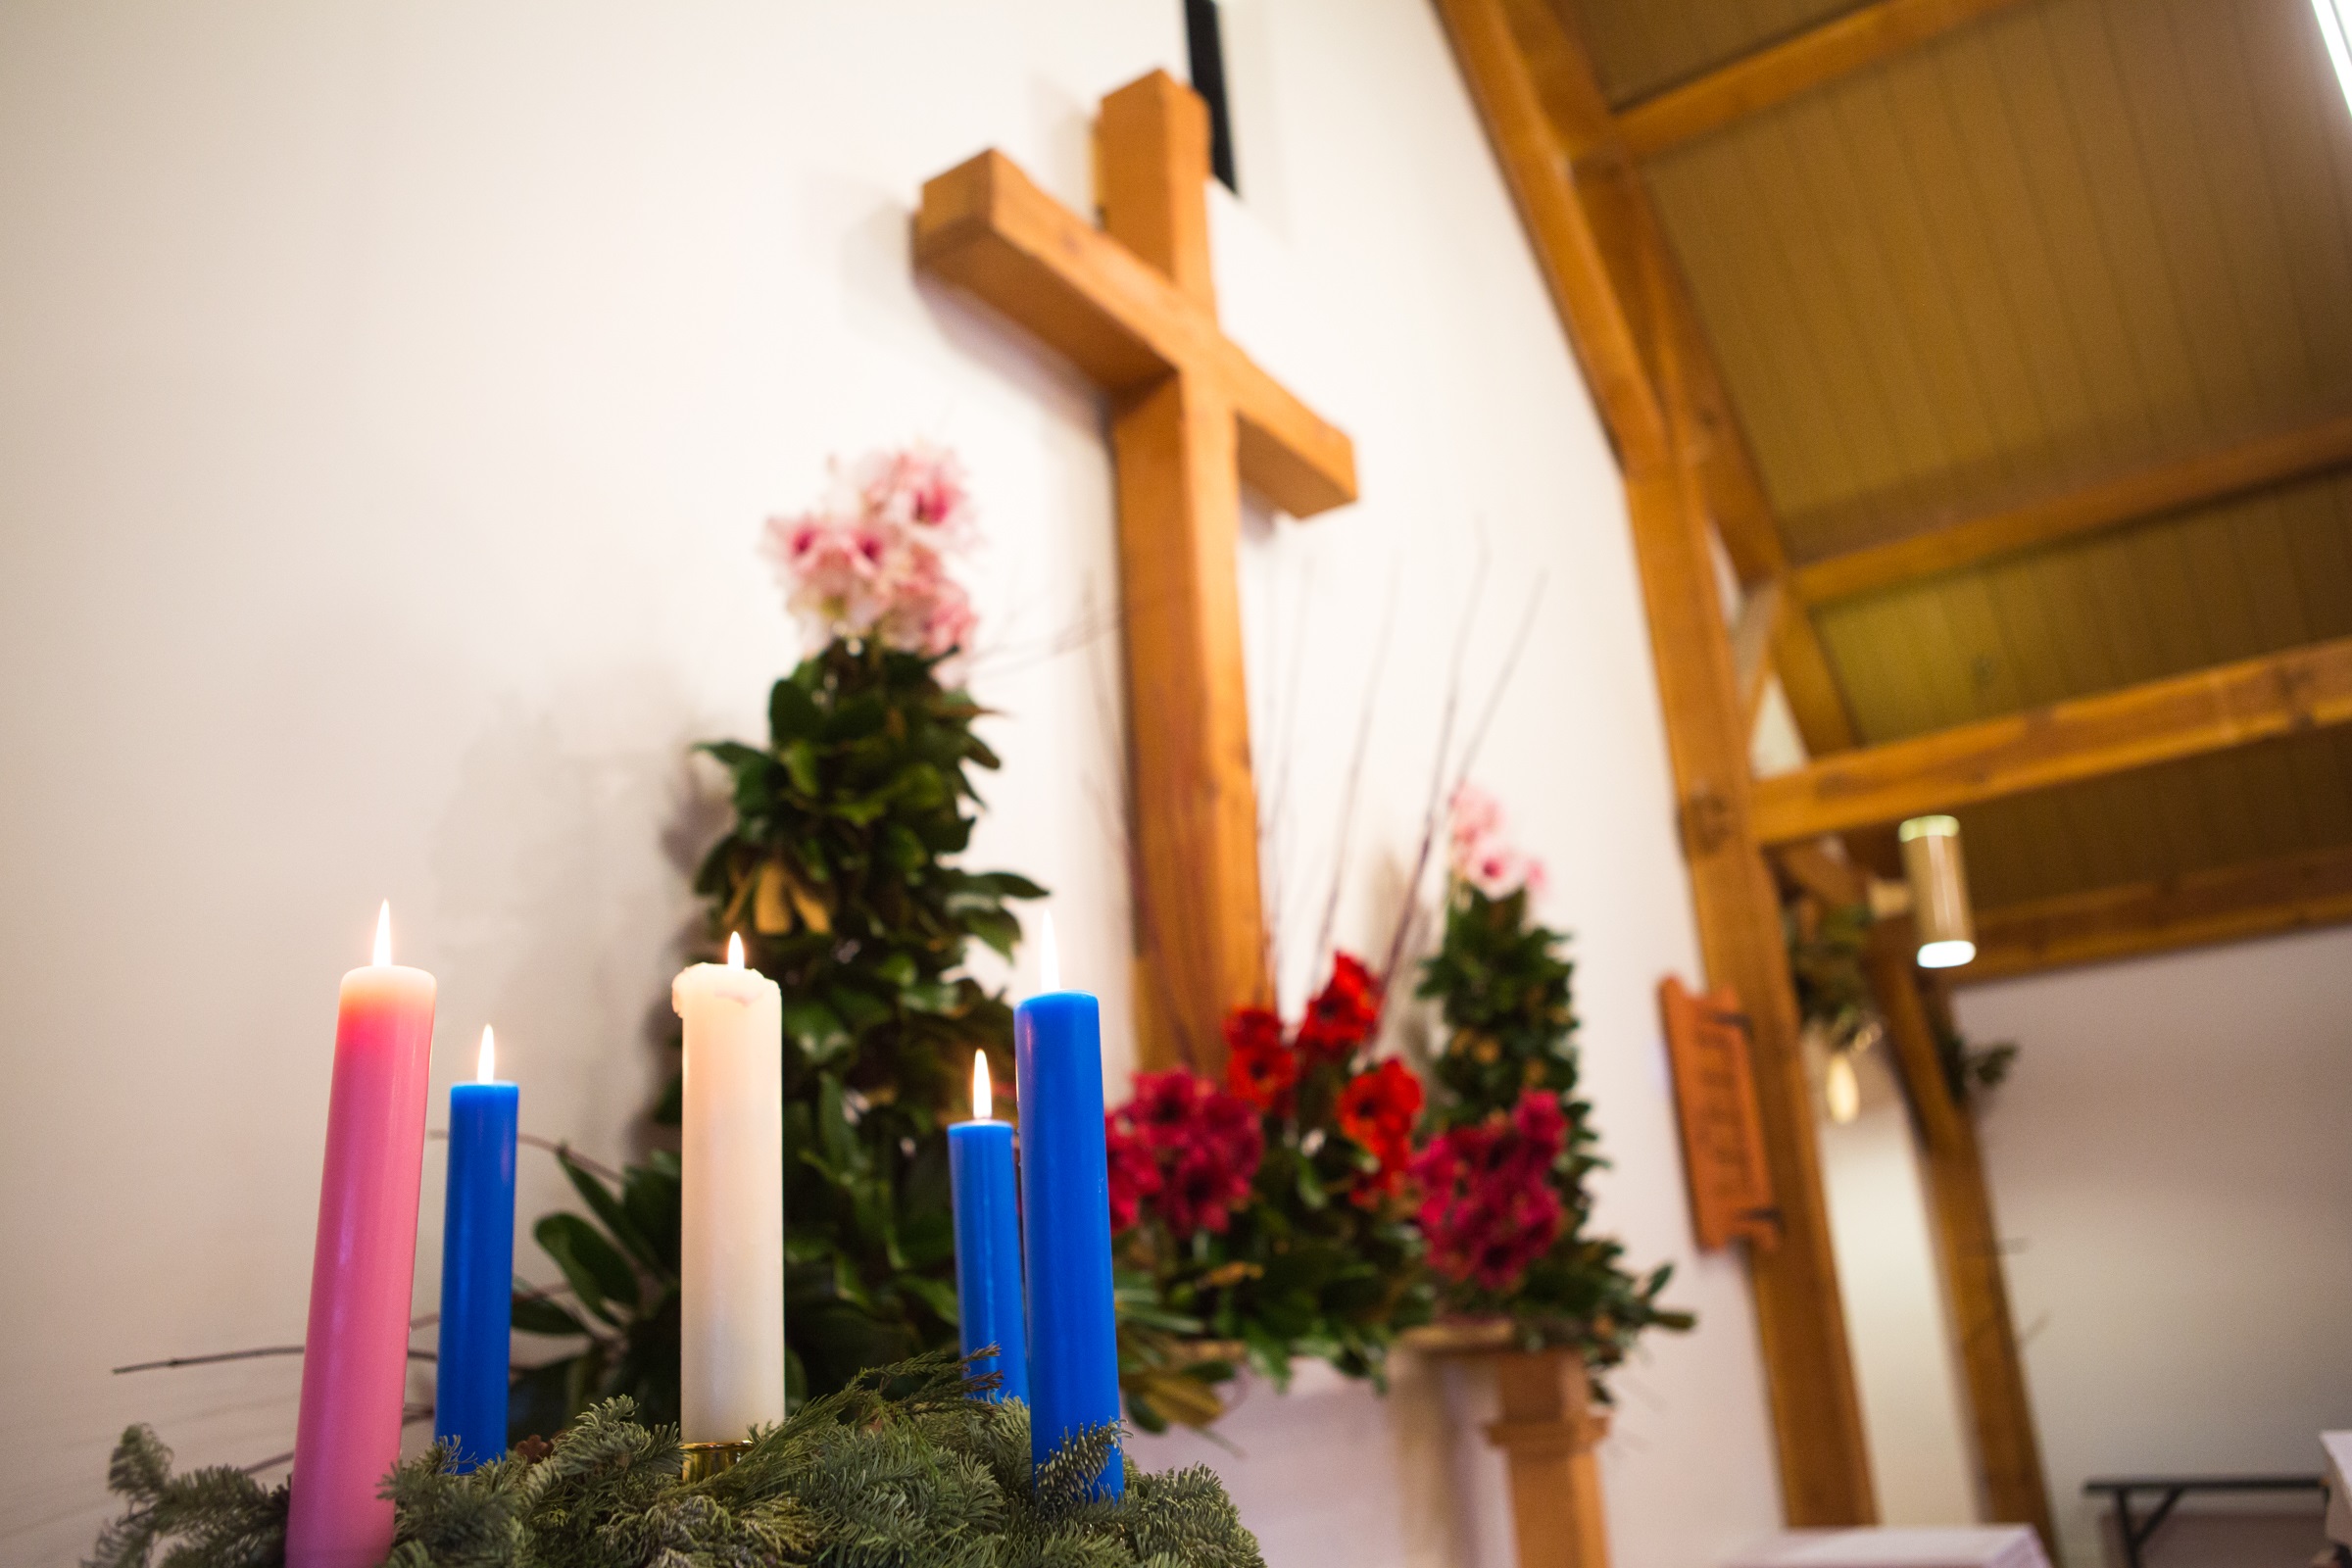 The First Sunday of Advent – The Rev. Chris Exley